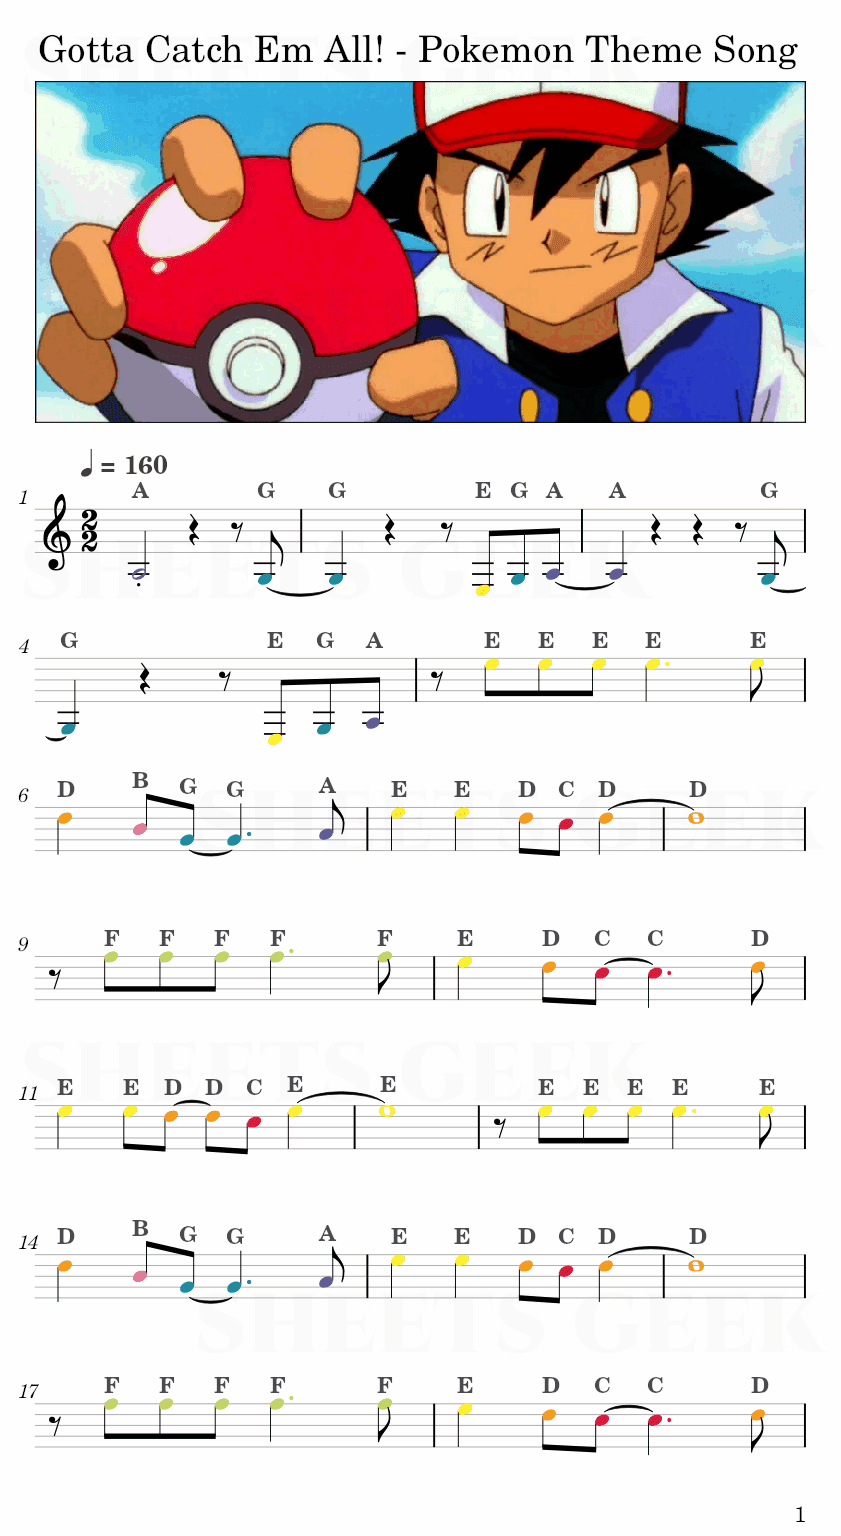 Gotta Catch Em All! - Pokemon Theme Song Easy Sheet Music Free for piano, keyboard, flute, violin, sax, cello page 1